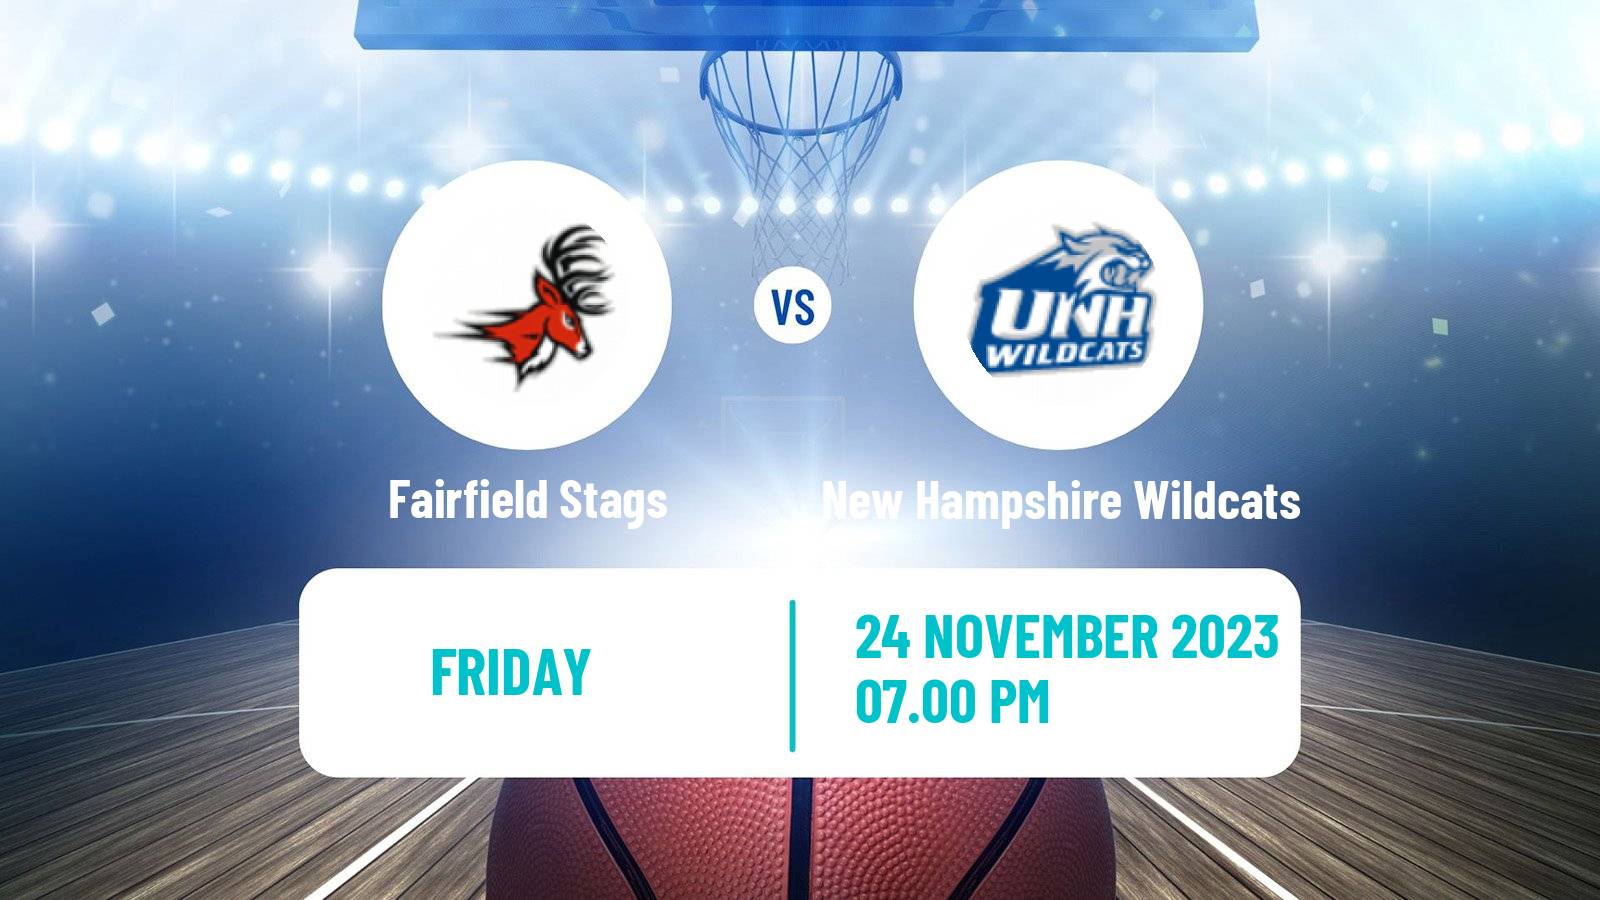 Basketball NCAA College Basketball Fairfield Stags - New Hampshire Wildcats